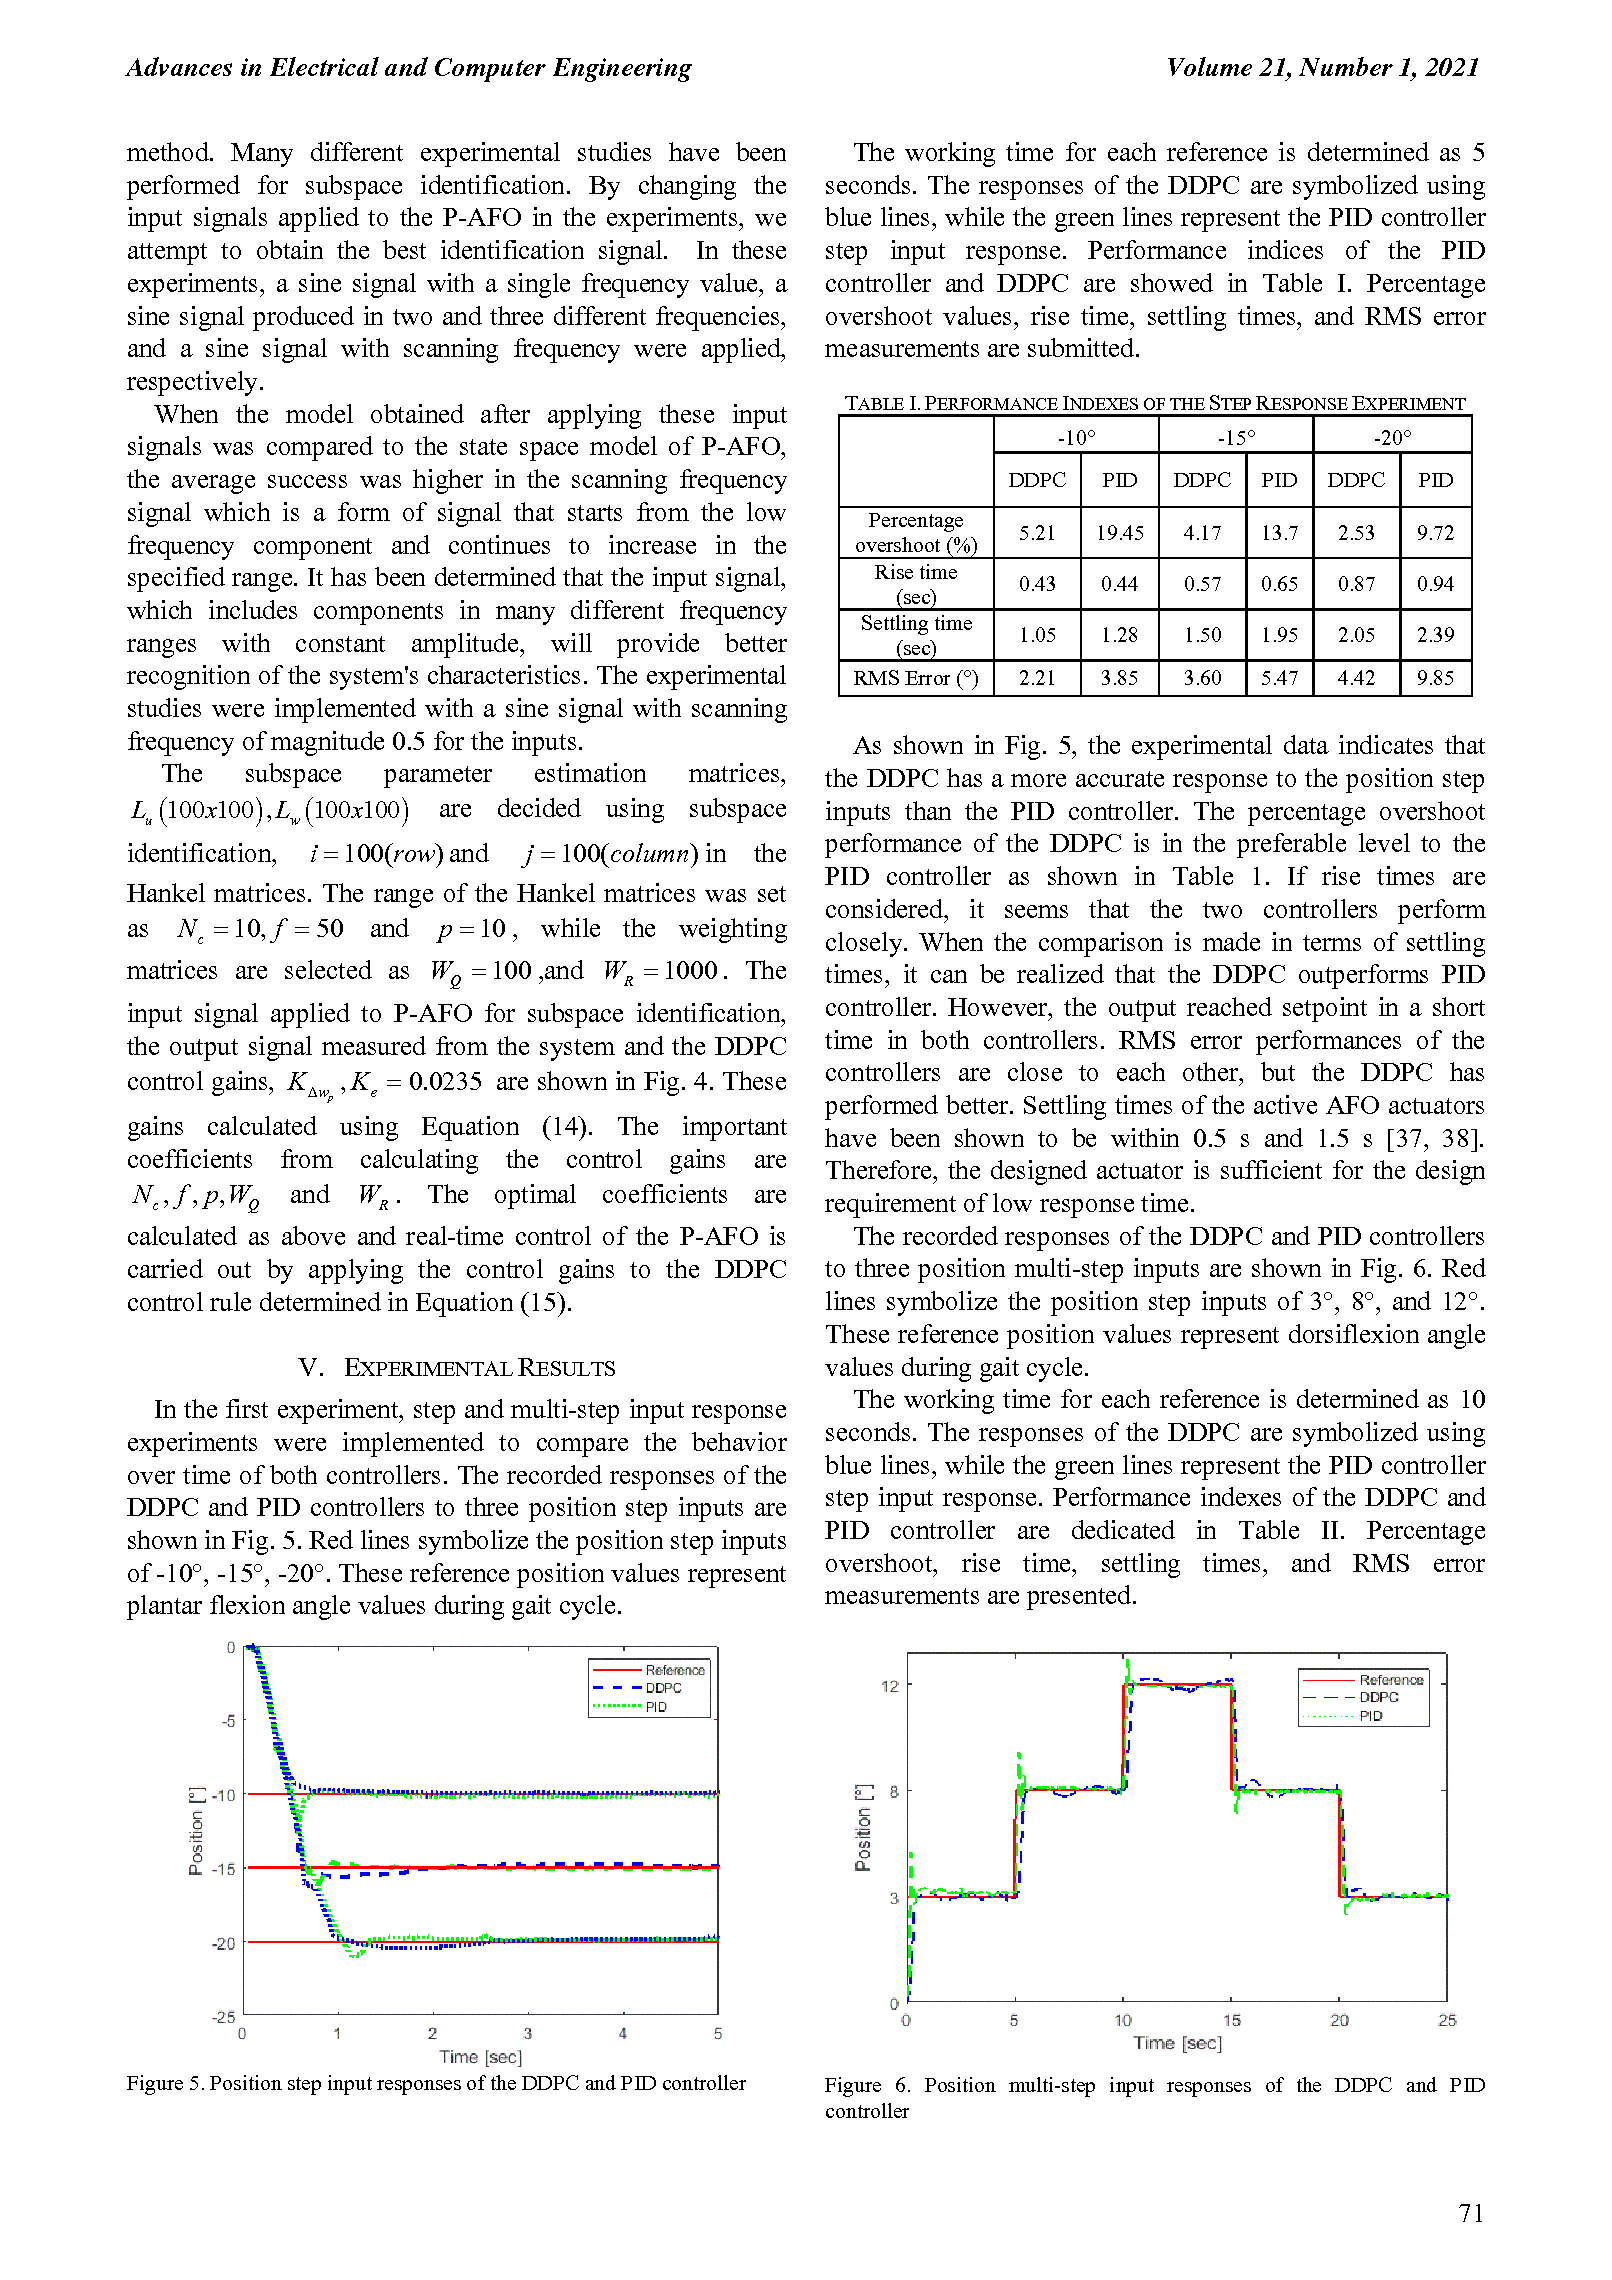 PDF Quickview for paper with DOI:10.4316/AECE.2021.01007